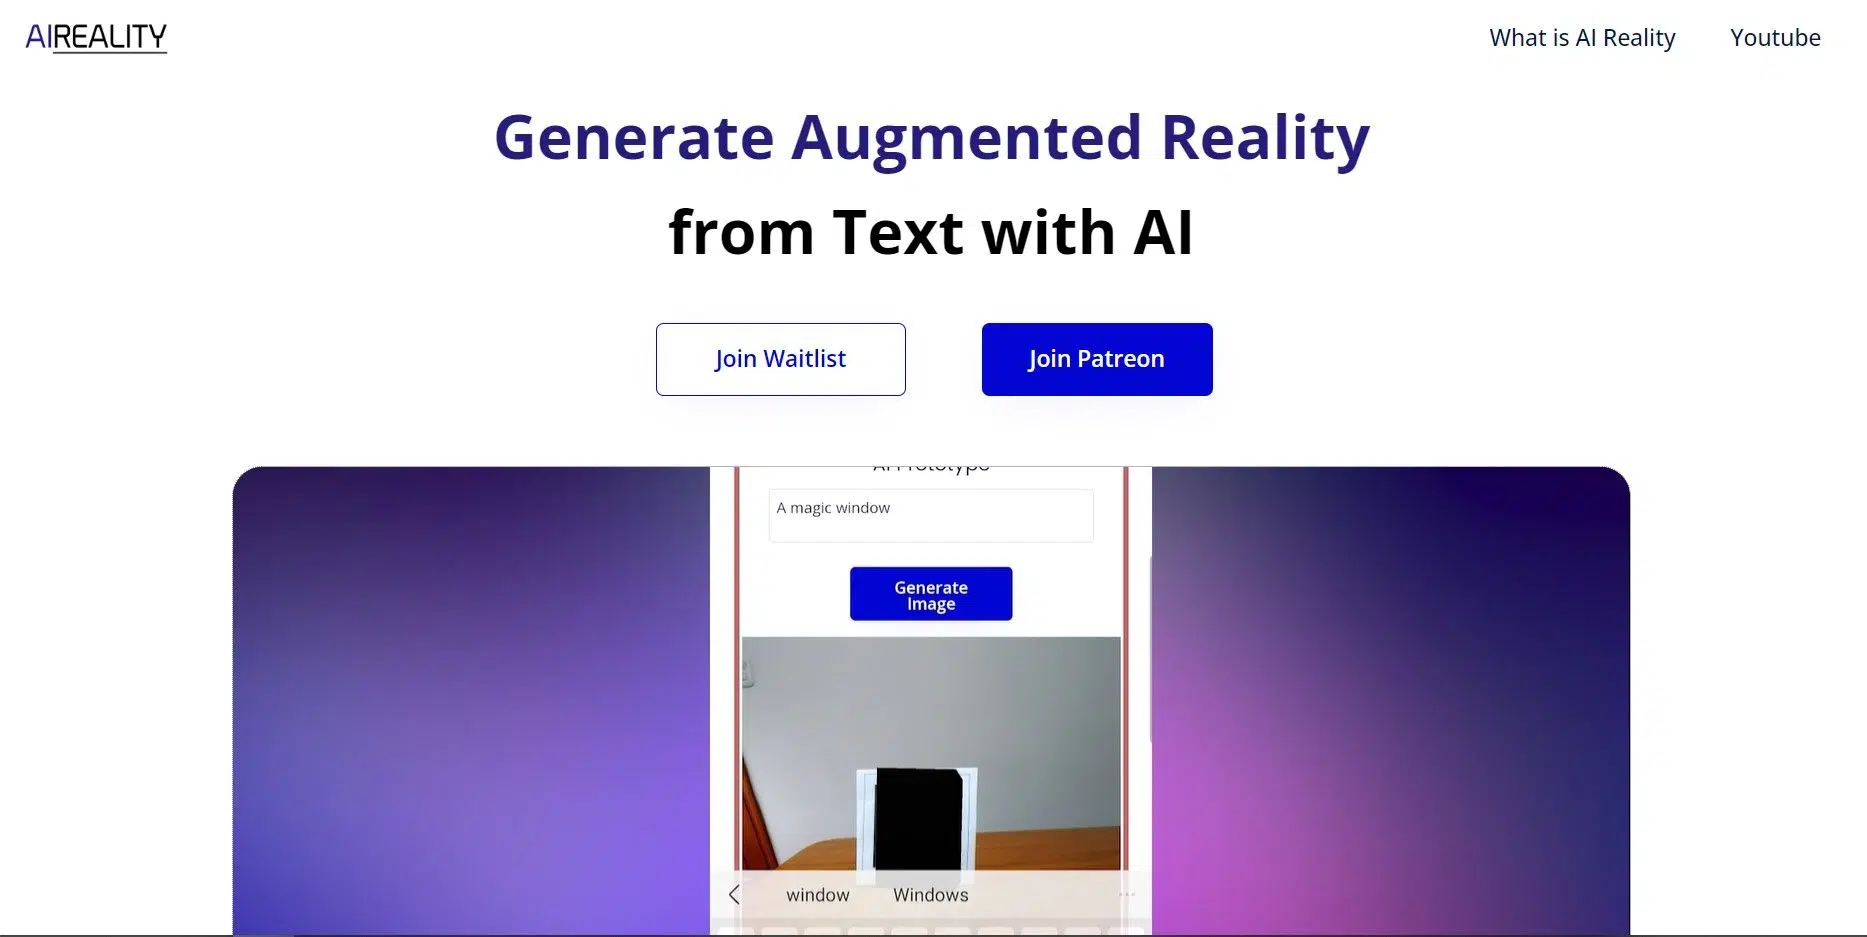 AI Realitywebsite picture